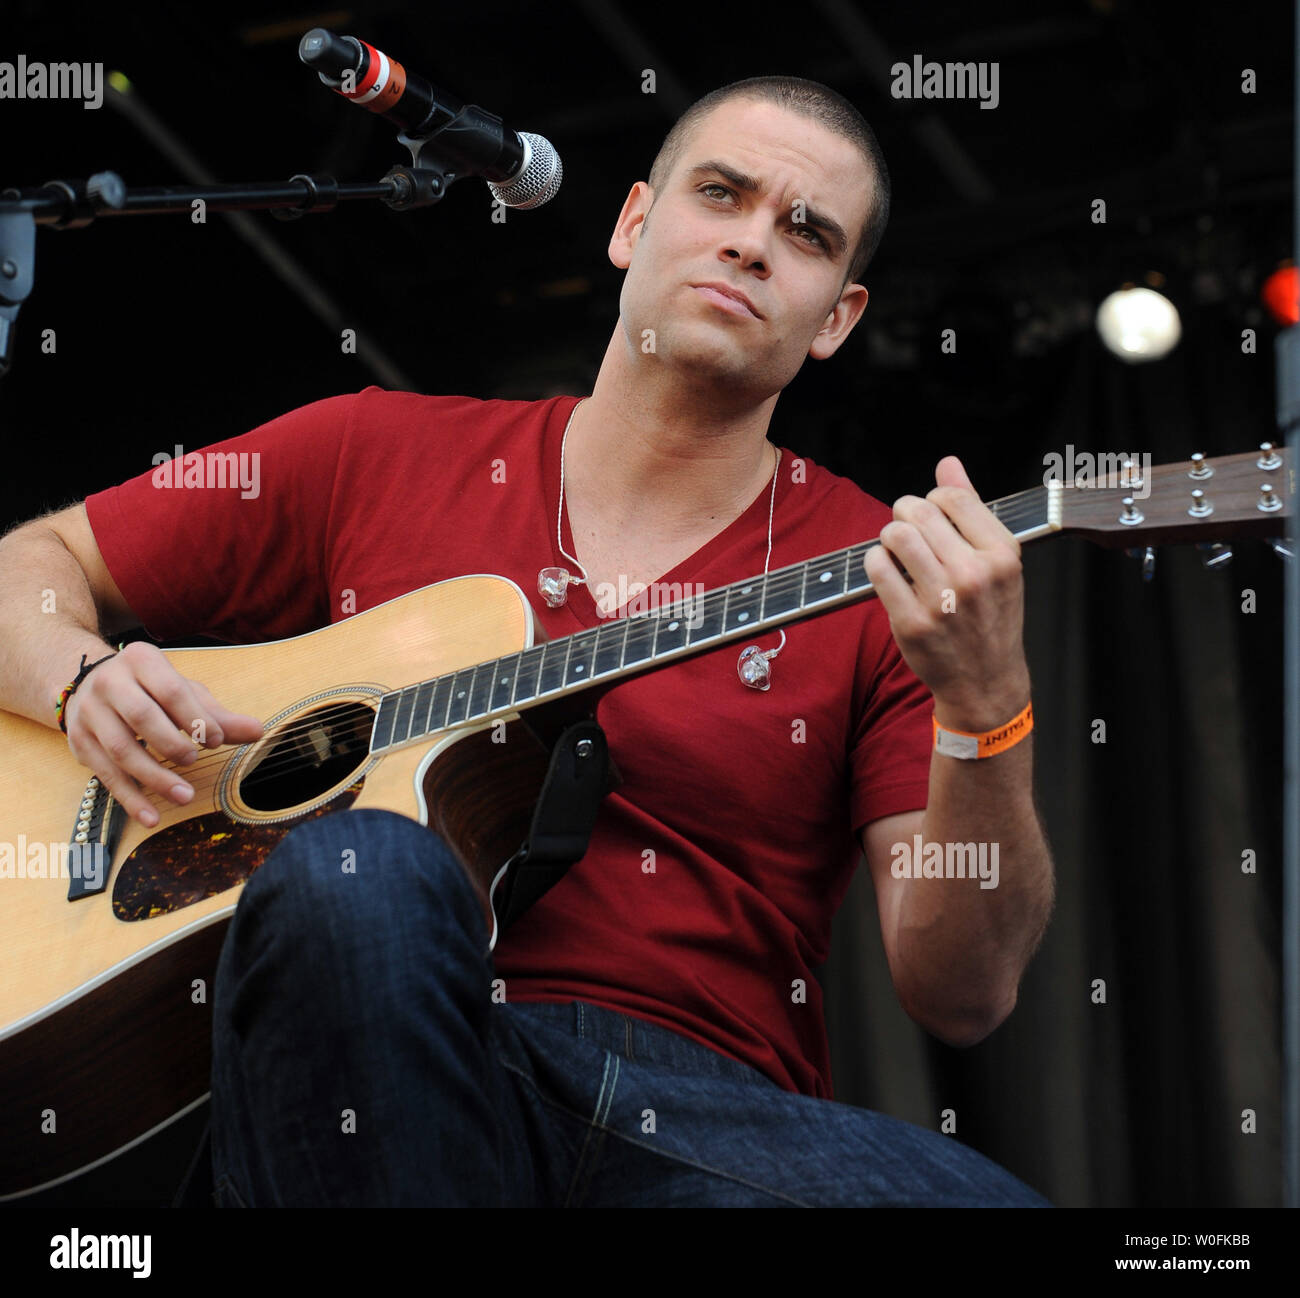 Mark Salling of the TV show 'Glee' performs on the South Lawn during the White House Easter Egg Roll in Washington on April 5, 2010.   UPI/Roger L. Wollenberg Stock Photo